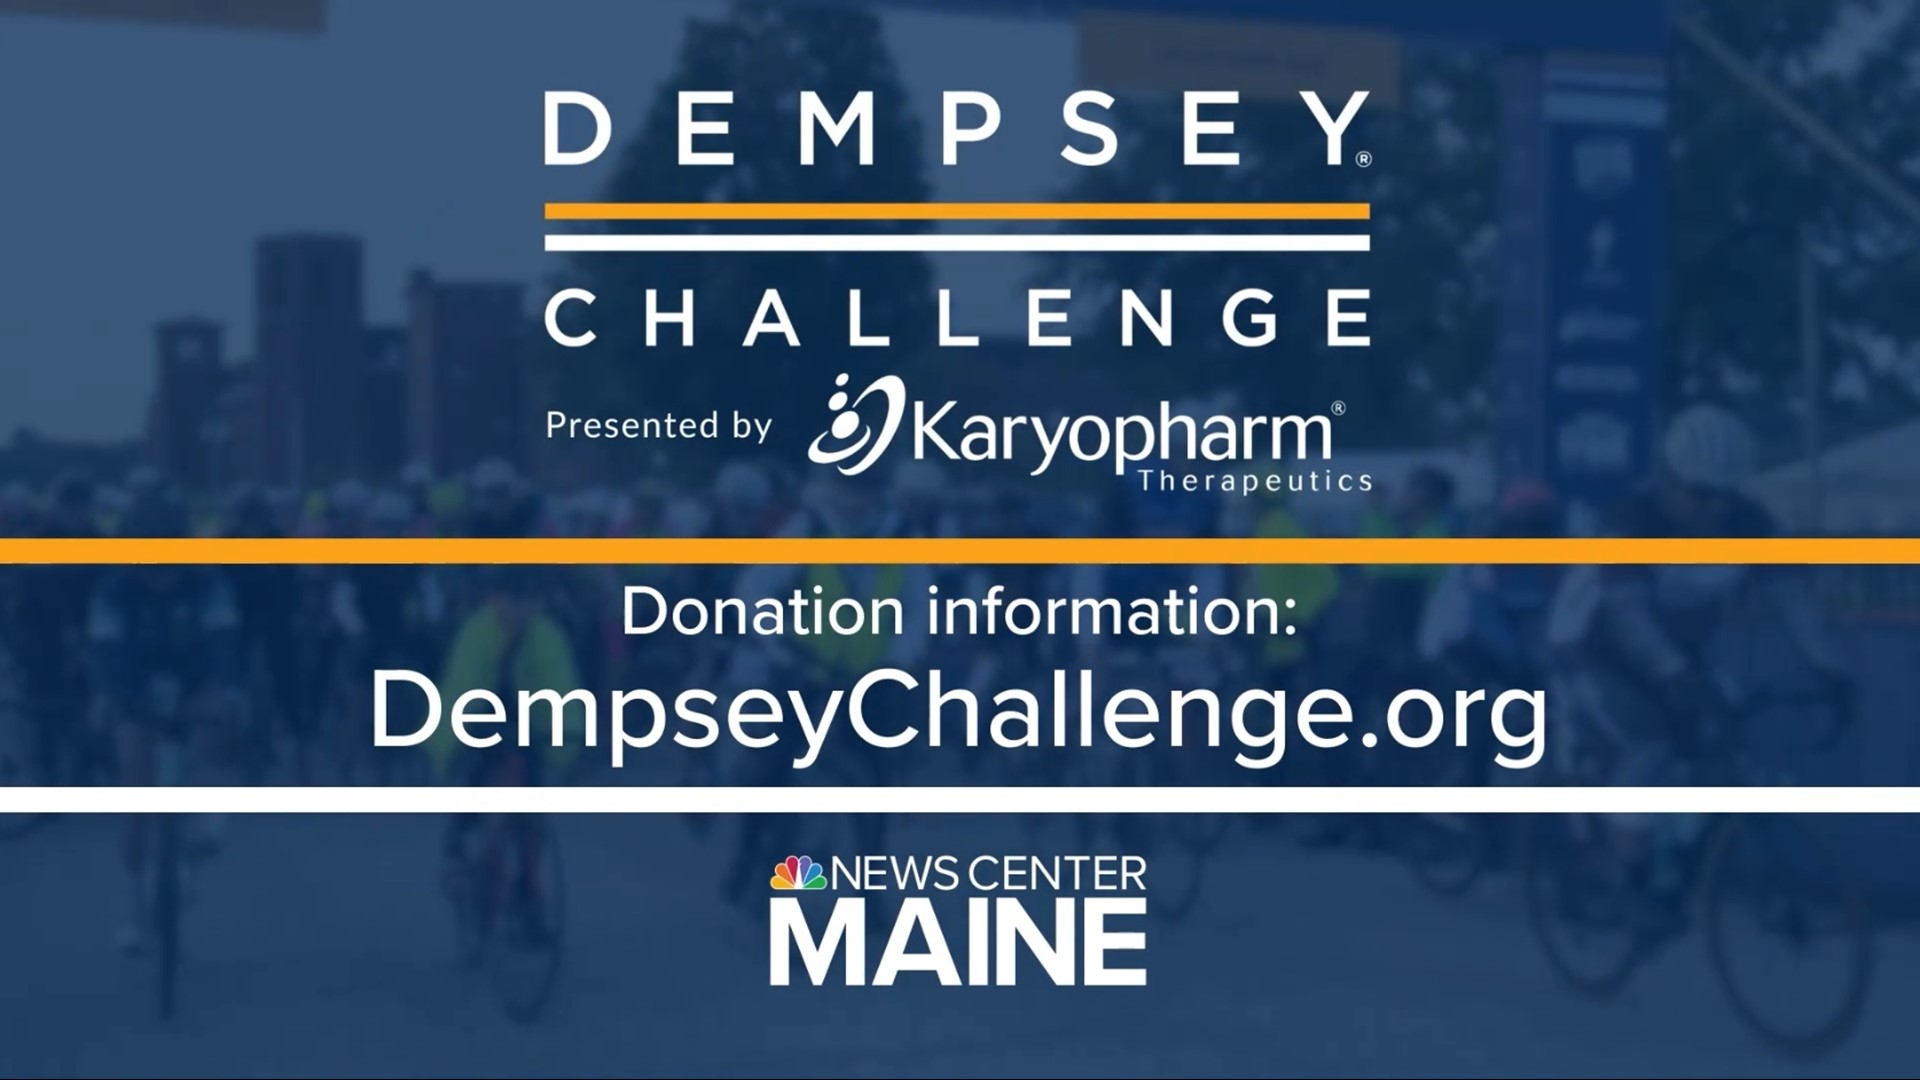 The Dempsey Center will be able to help so many more people who are impacted by cancer due to your donations. You can still donate at: dempseychallenge.org